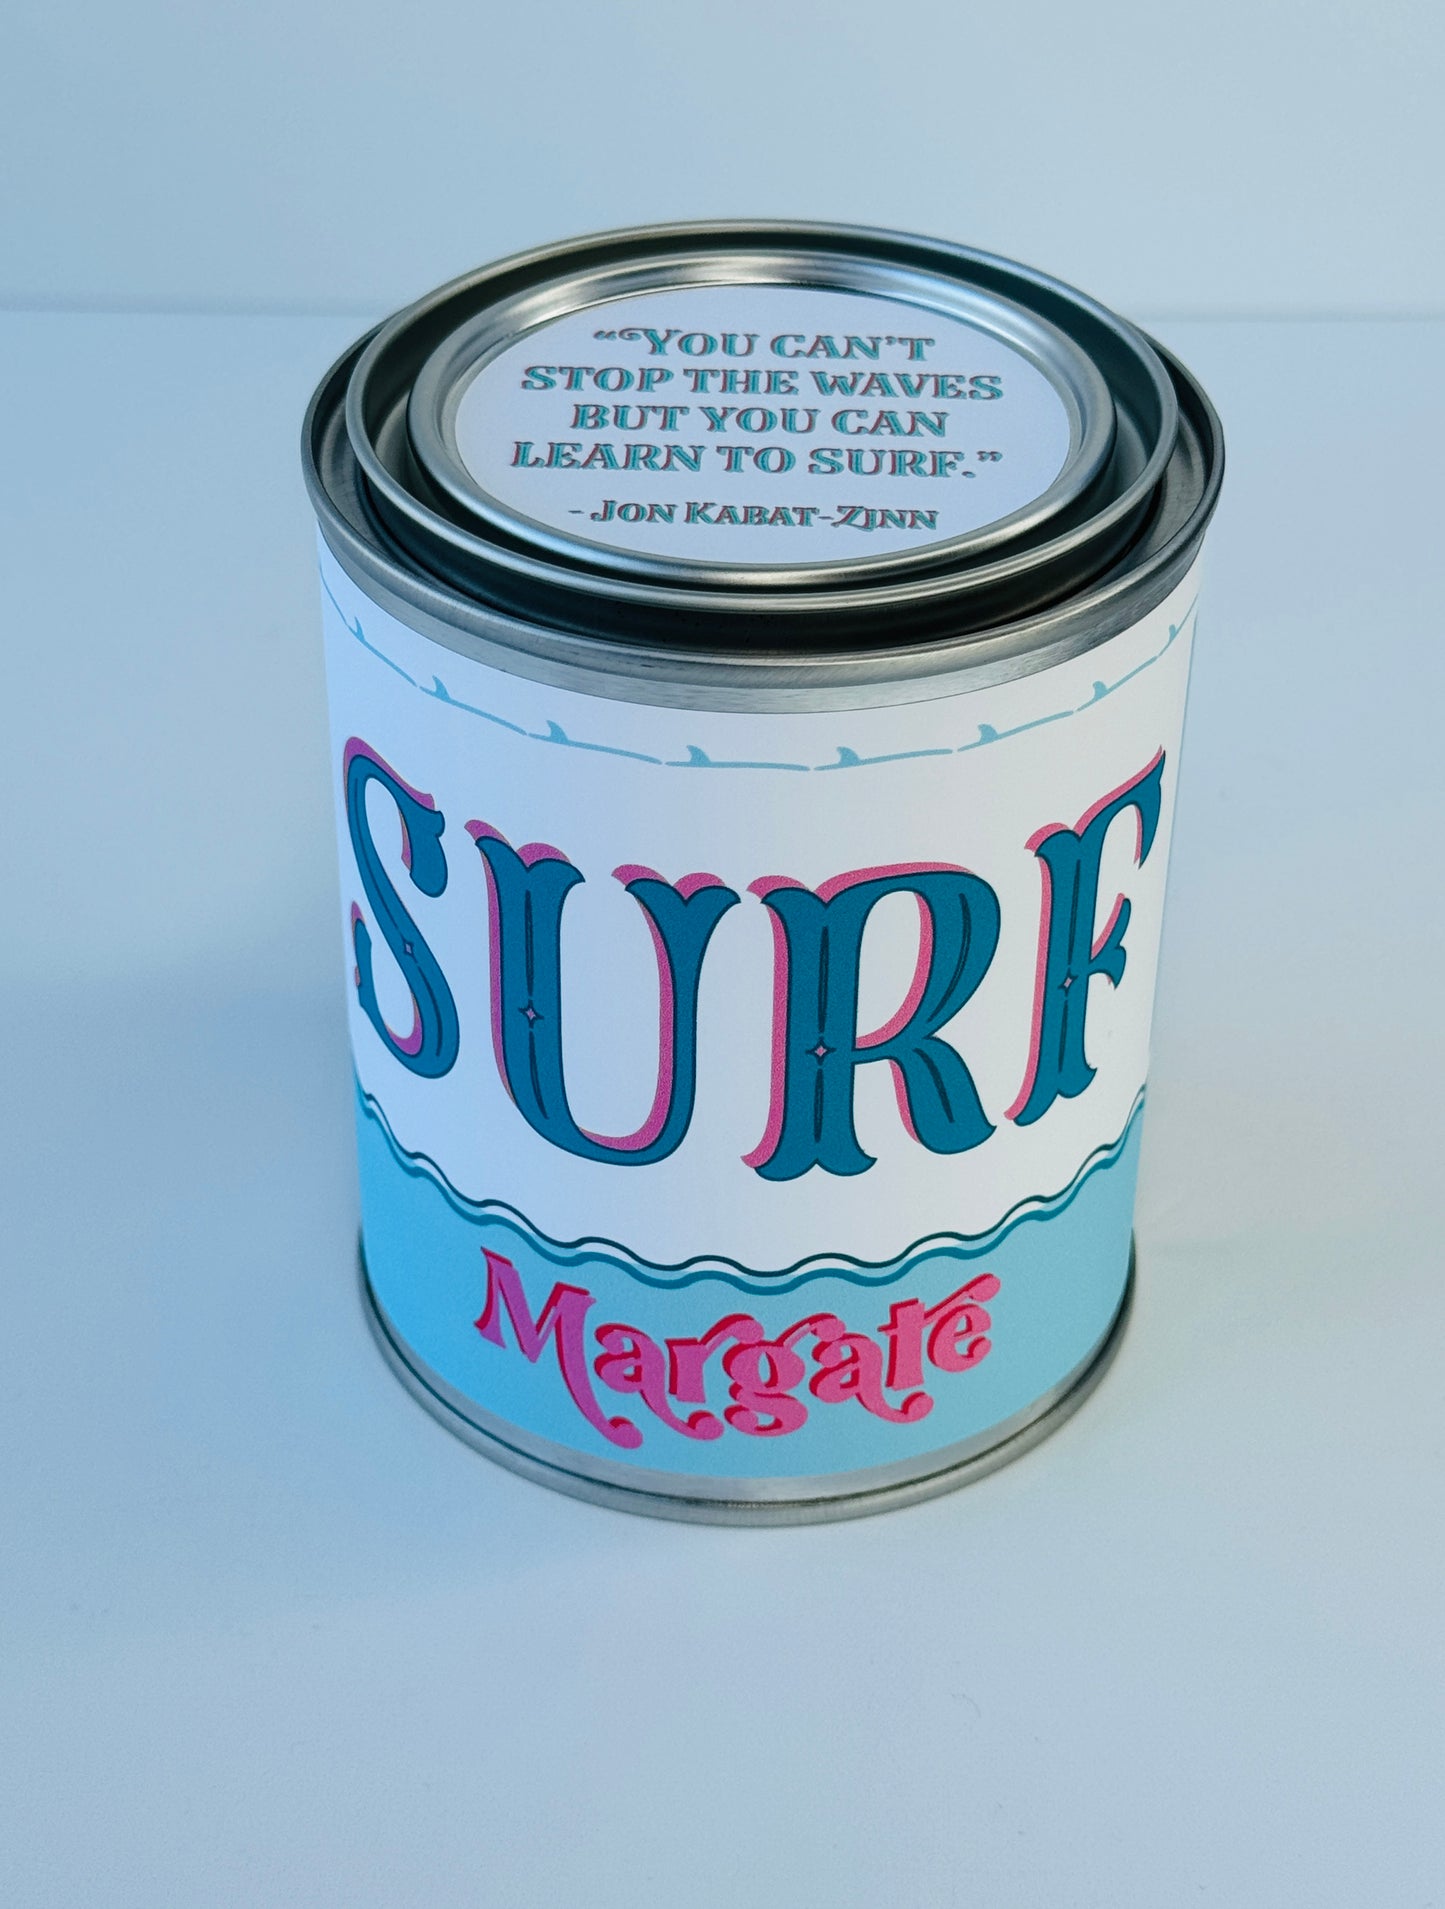 Surf Margate - Paint Tin Candle